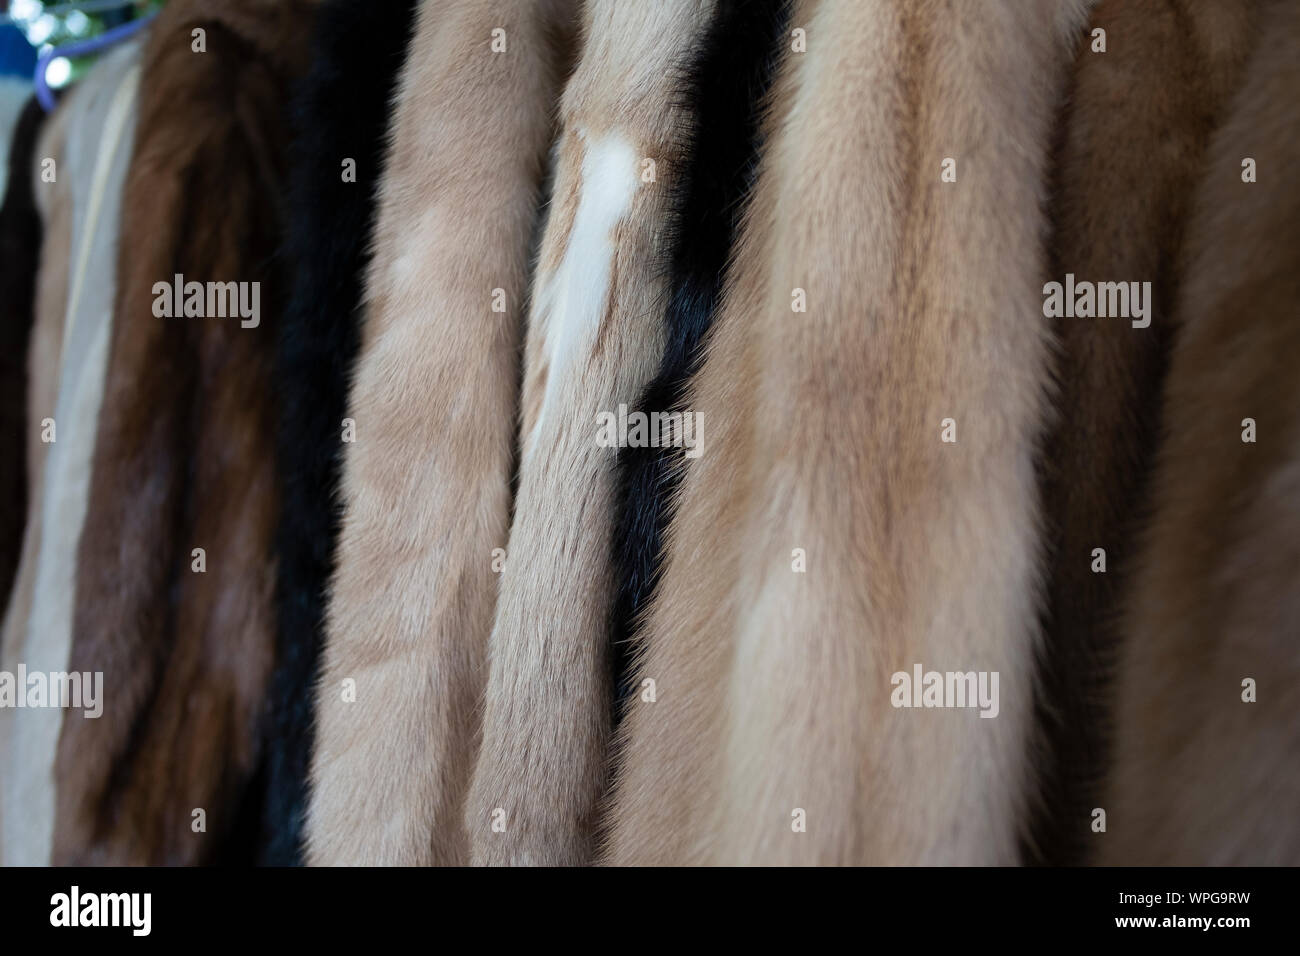 Vintage Fur Coats High Resolution Stock Photography and Images - Alamy